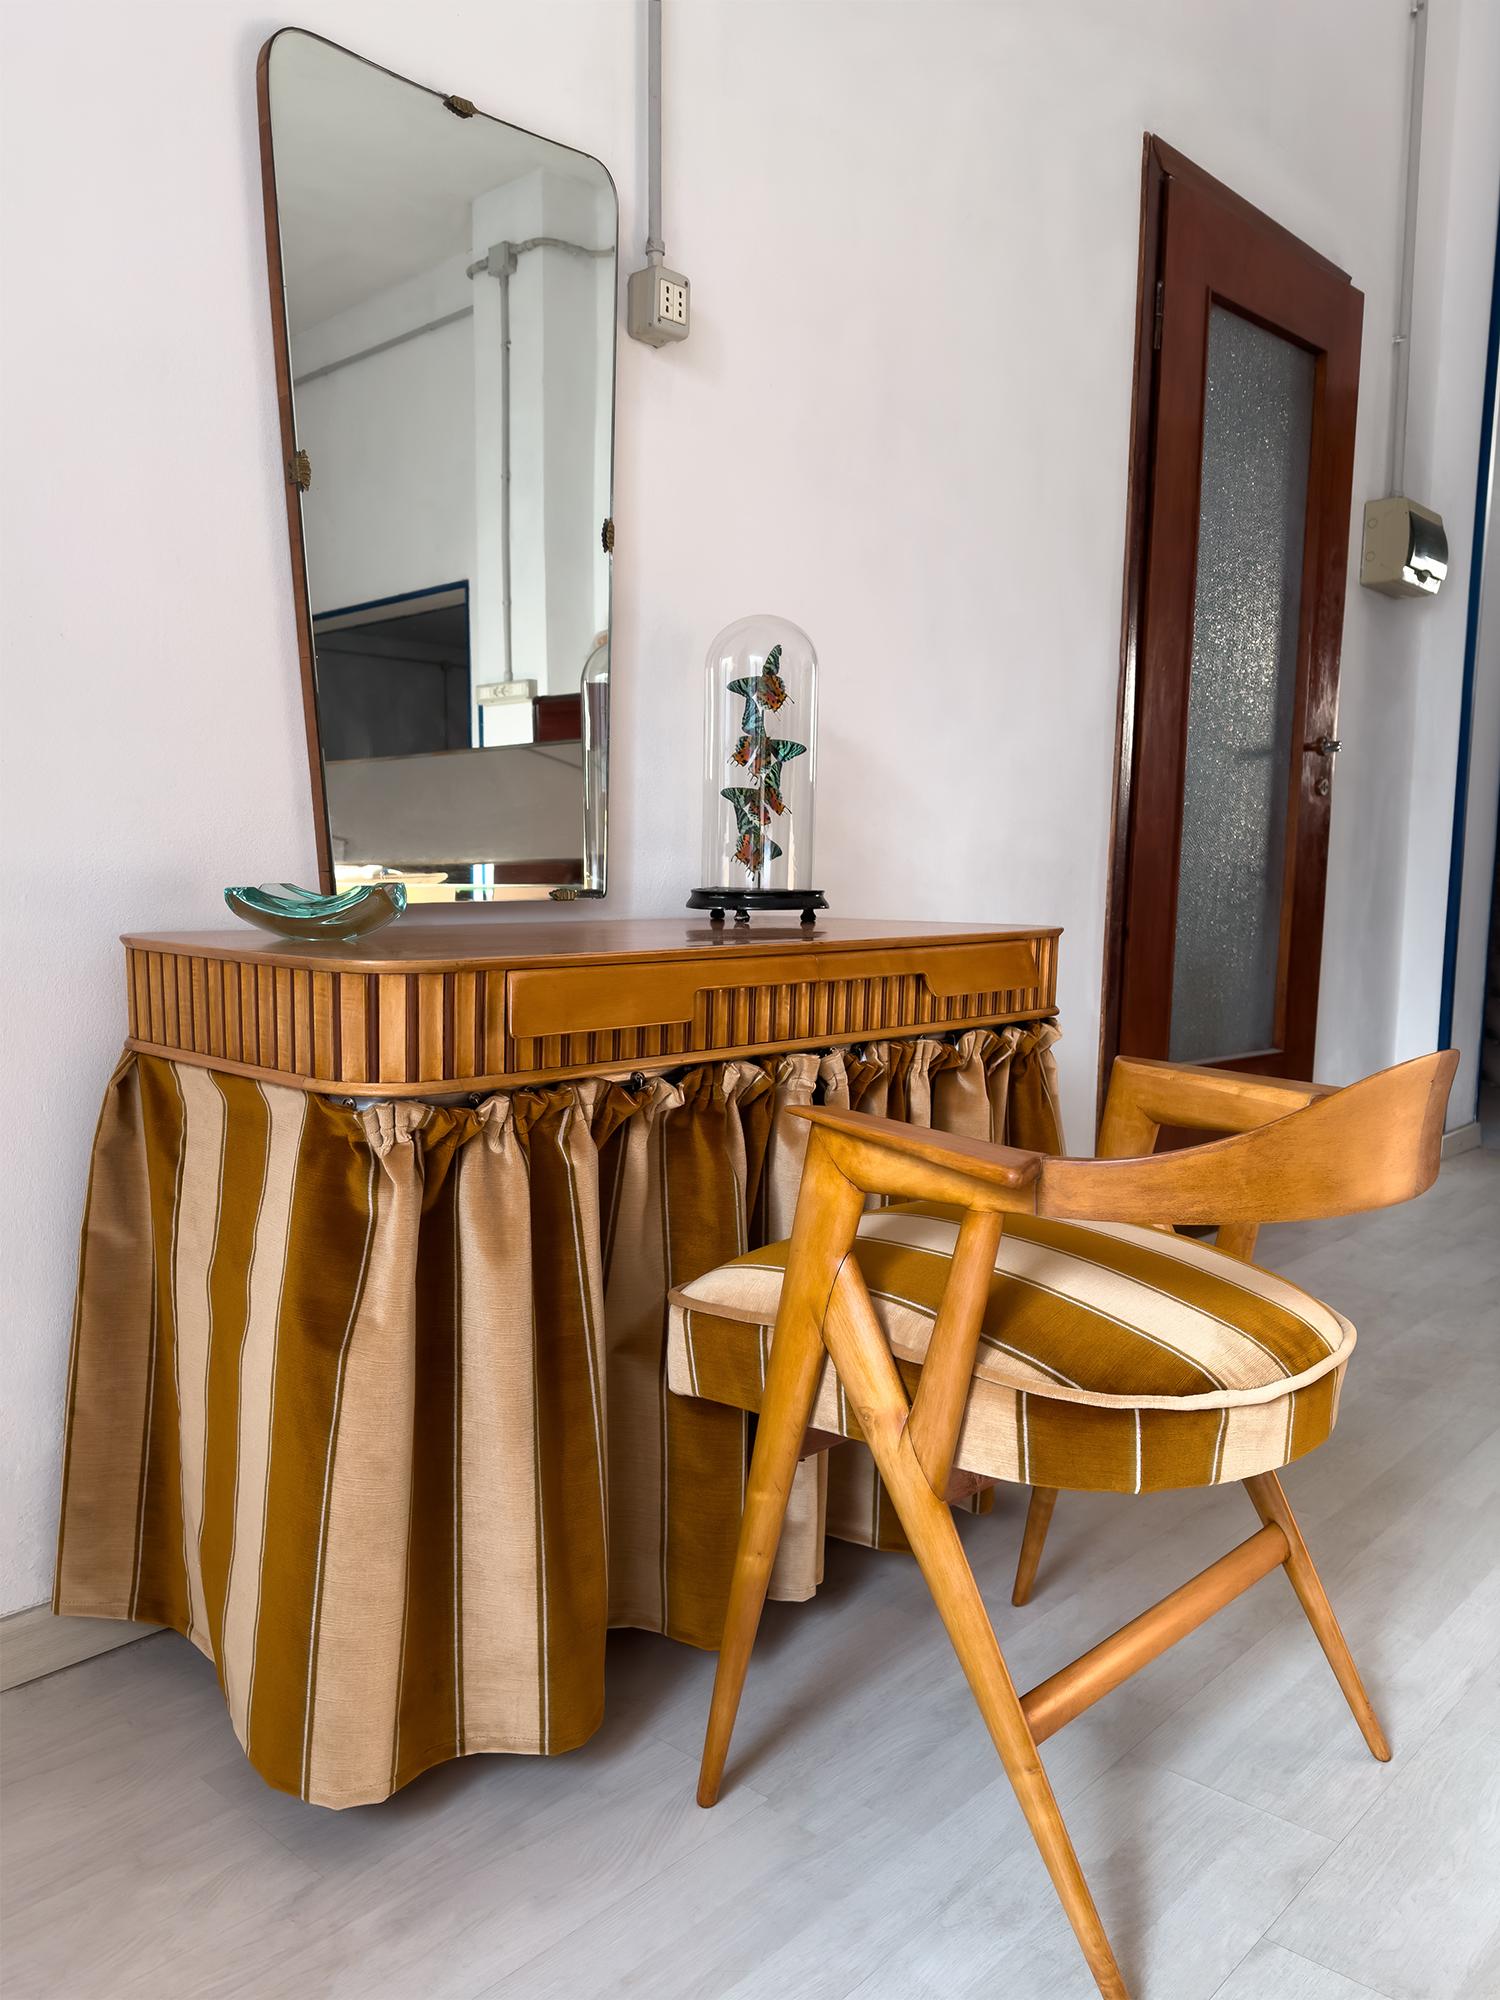 Italian Midcentury Vanity Table with Armchair by Vittorio Dassi, 1950s For Sale 6